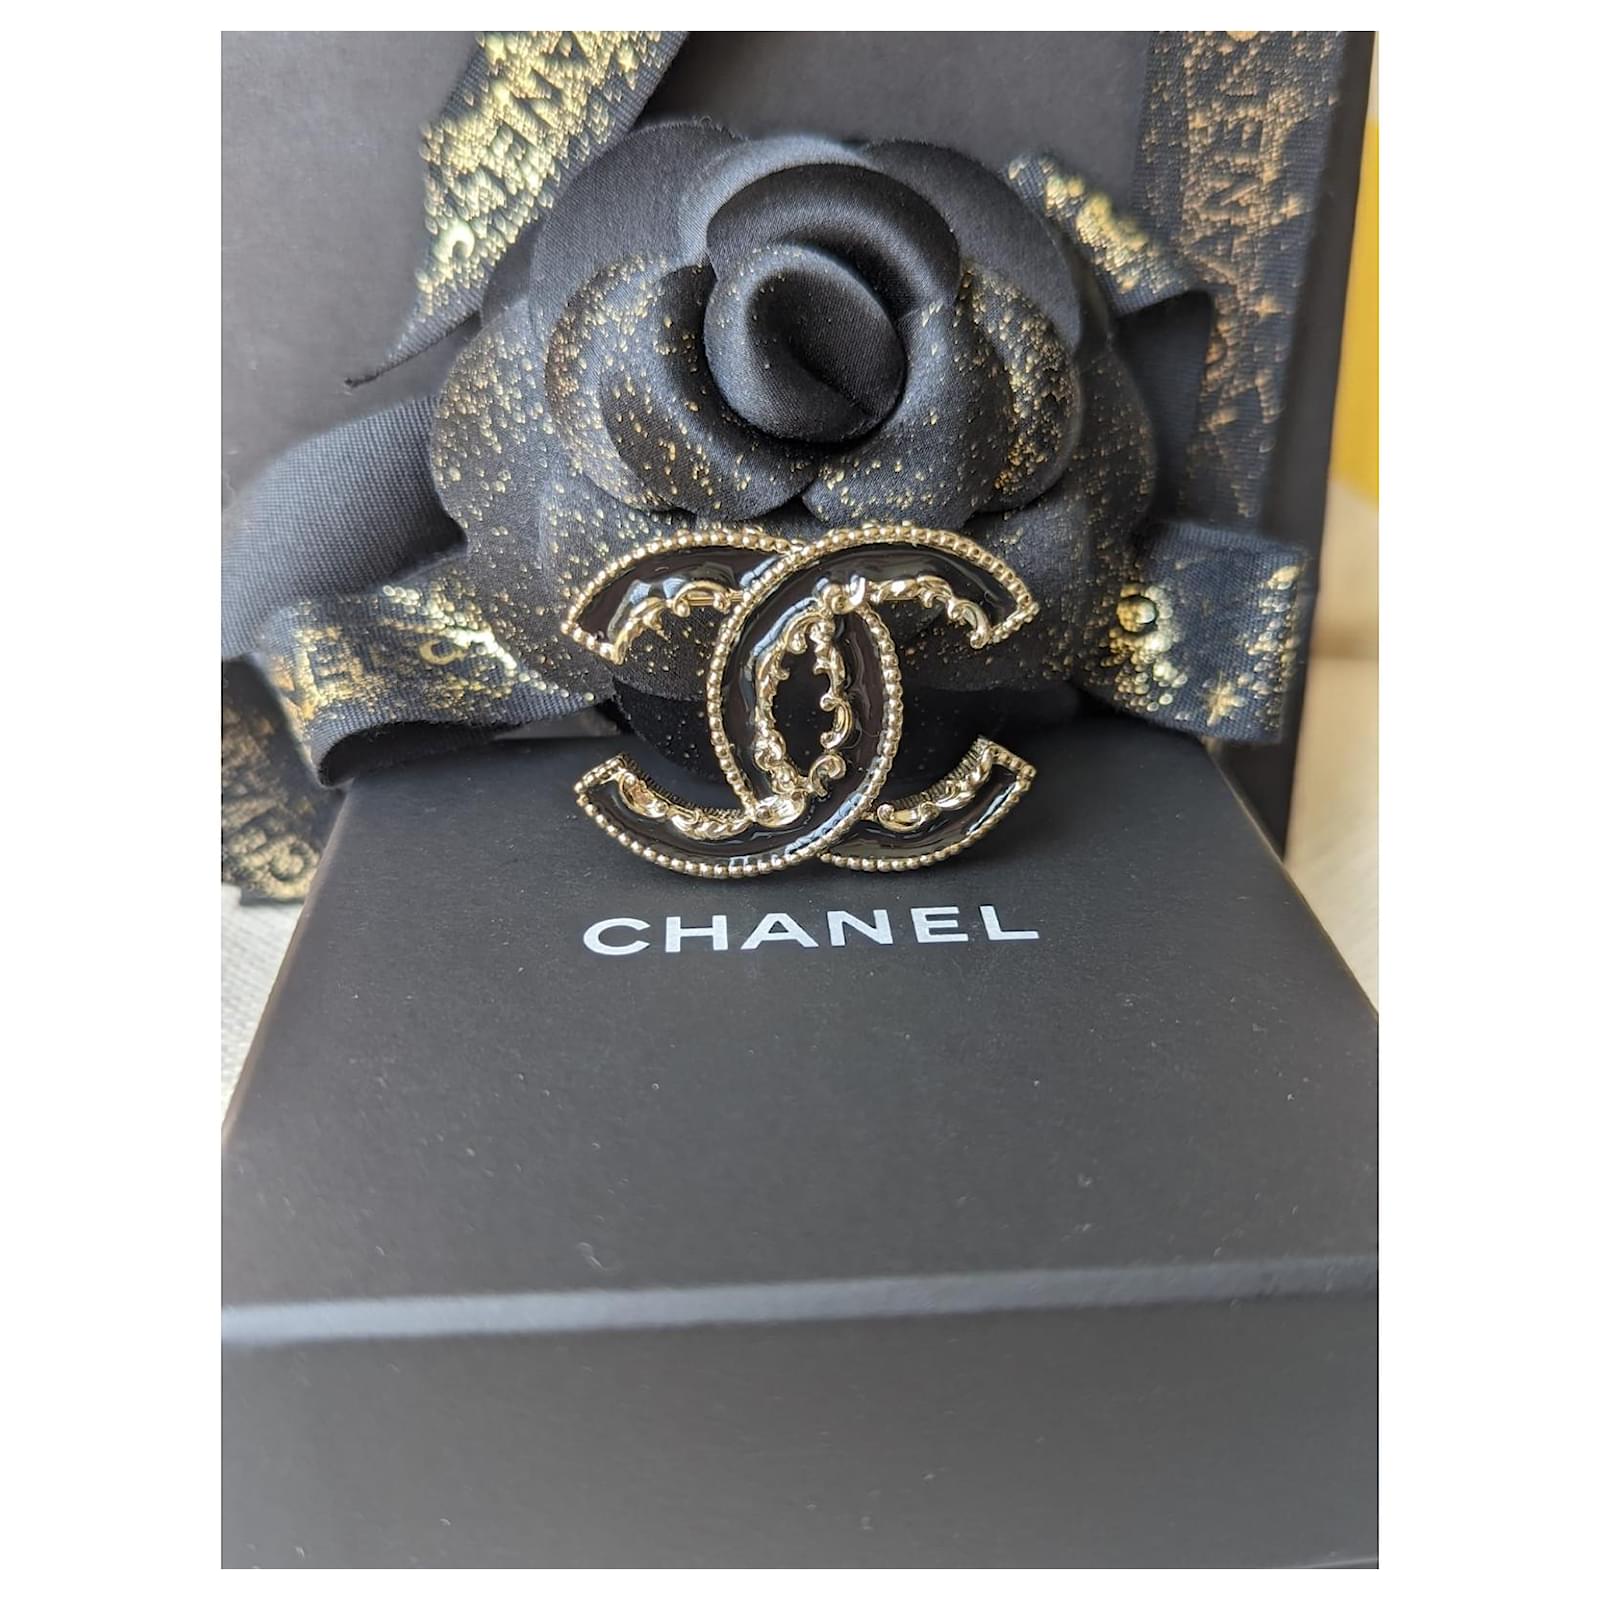 Chanel Brooch Here Mark Gold X Black Metal Material Color Stone Women's